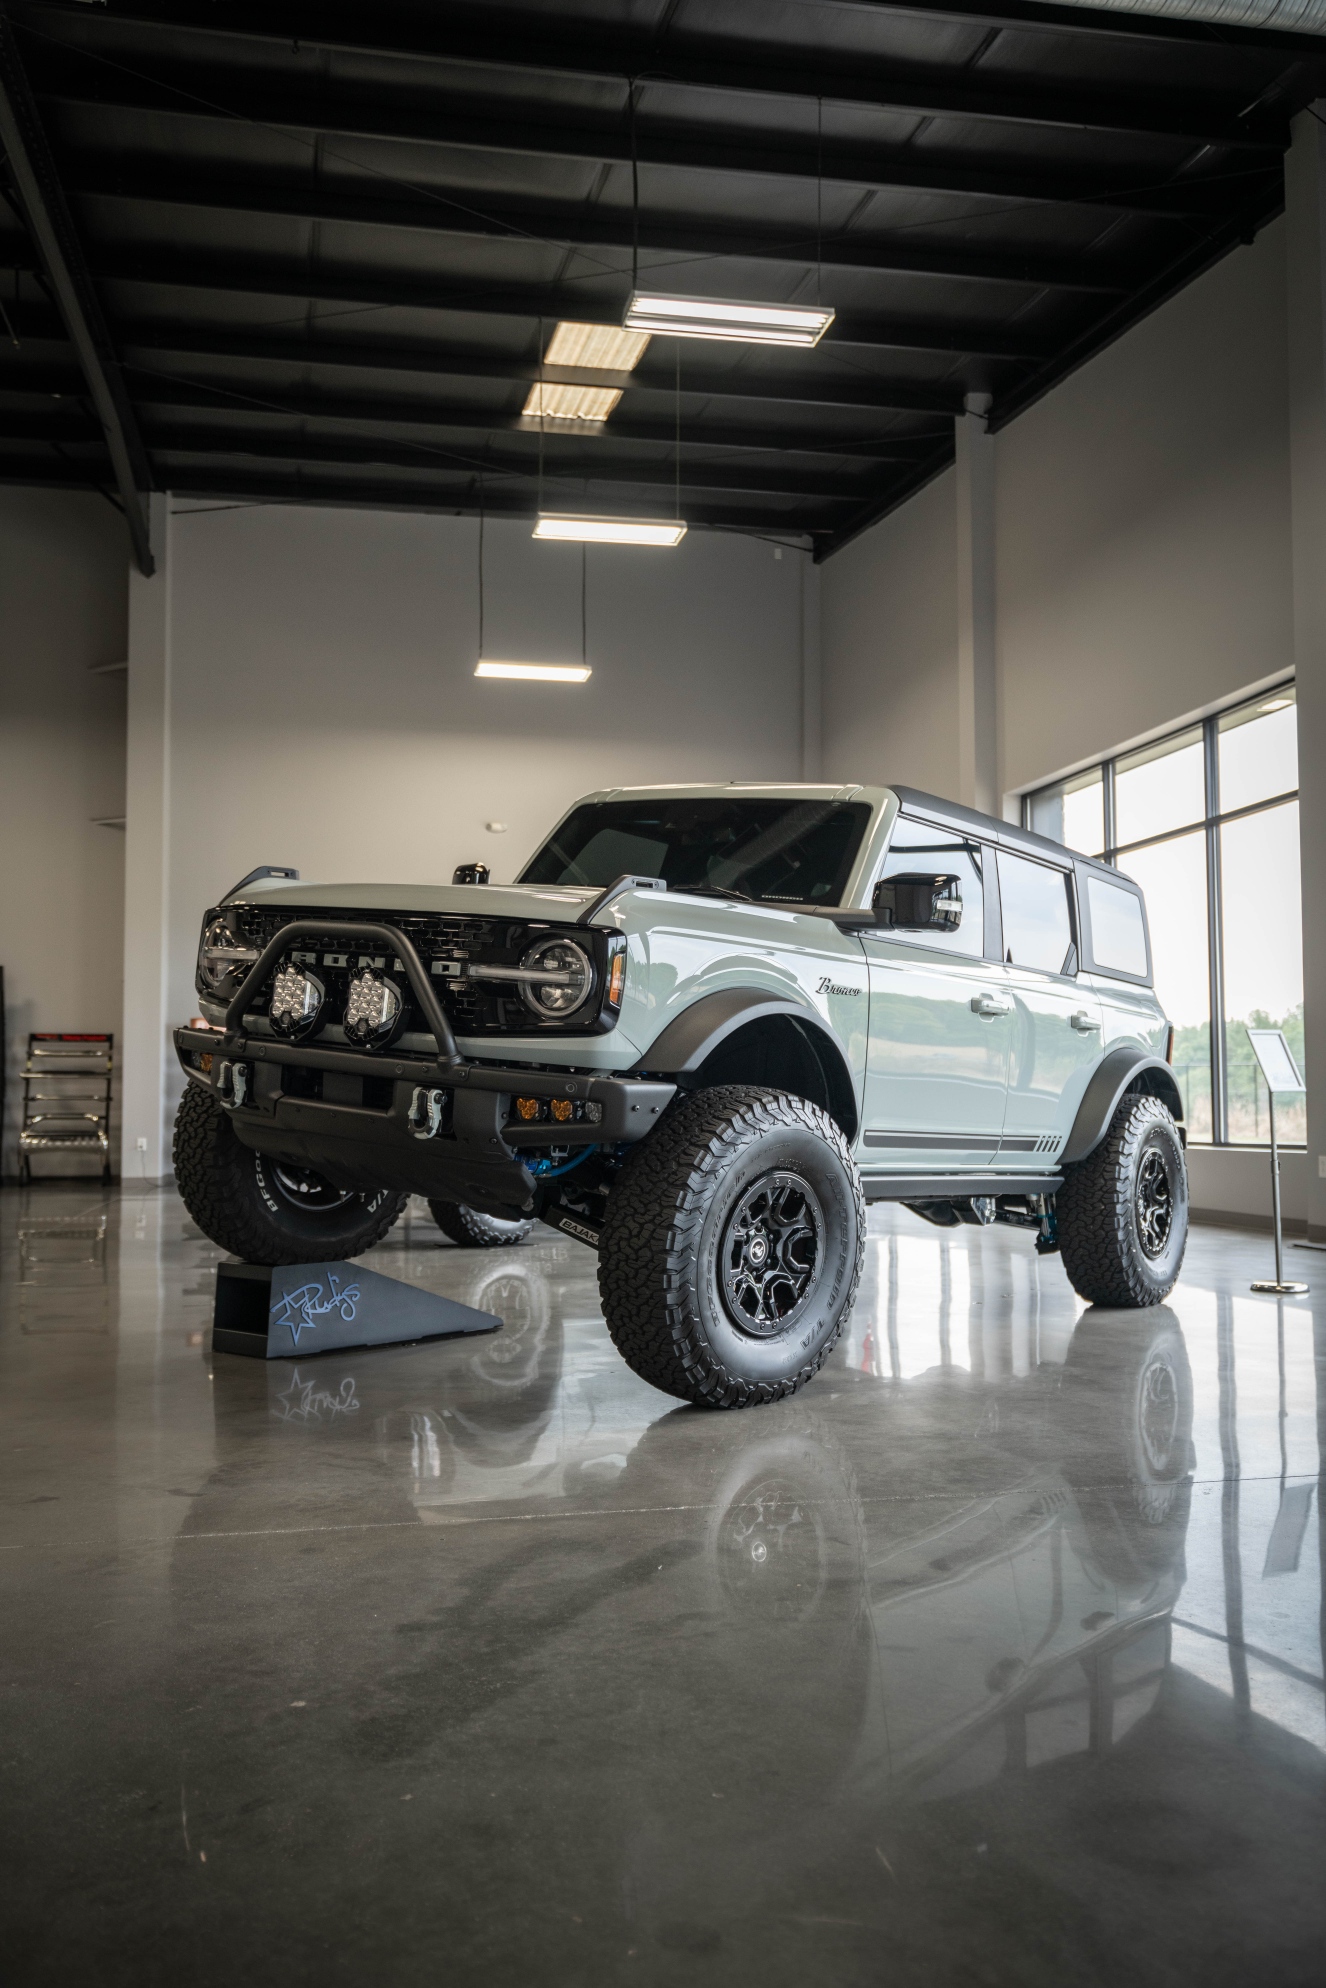 Ford Bronco Rudy's First Edition Bronco with Baja Kits Prerunner Suspension Resized_RDP09757